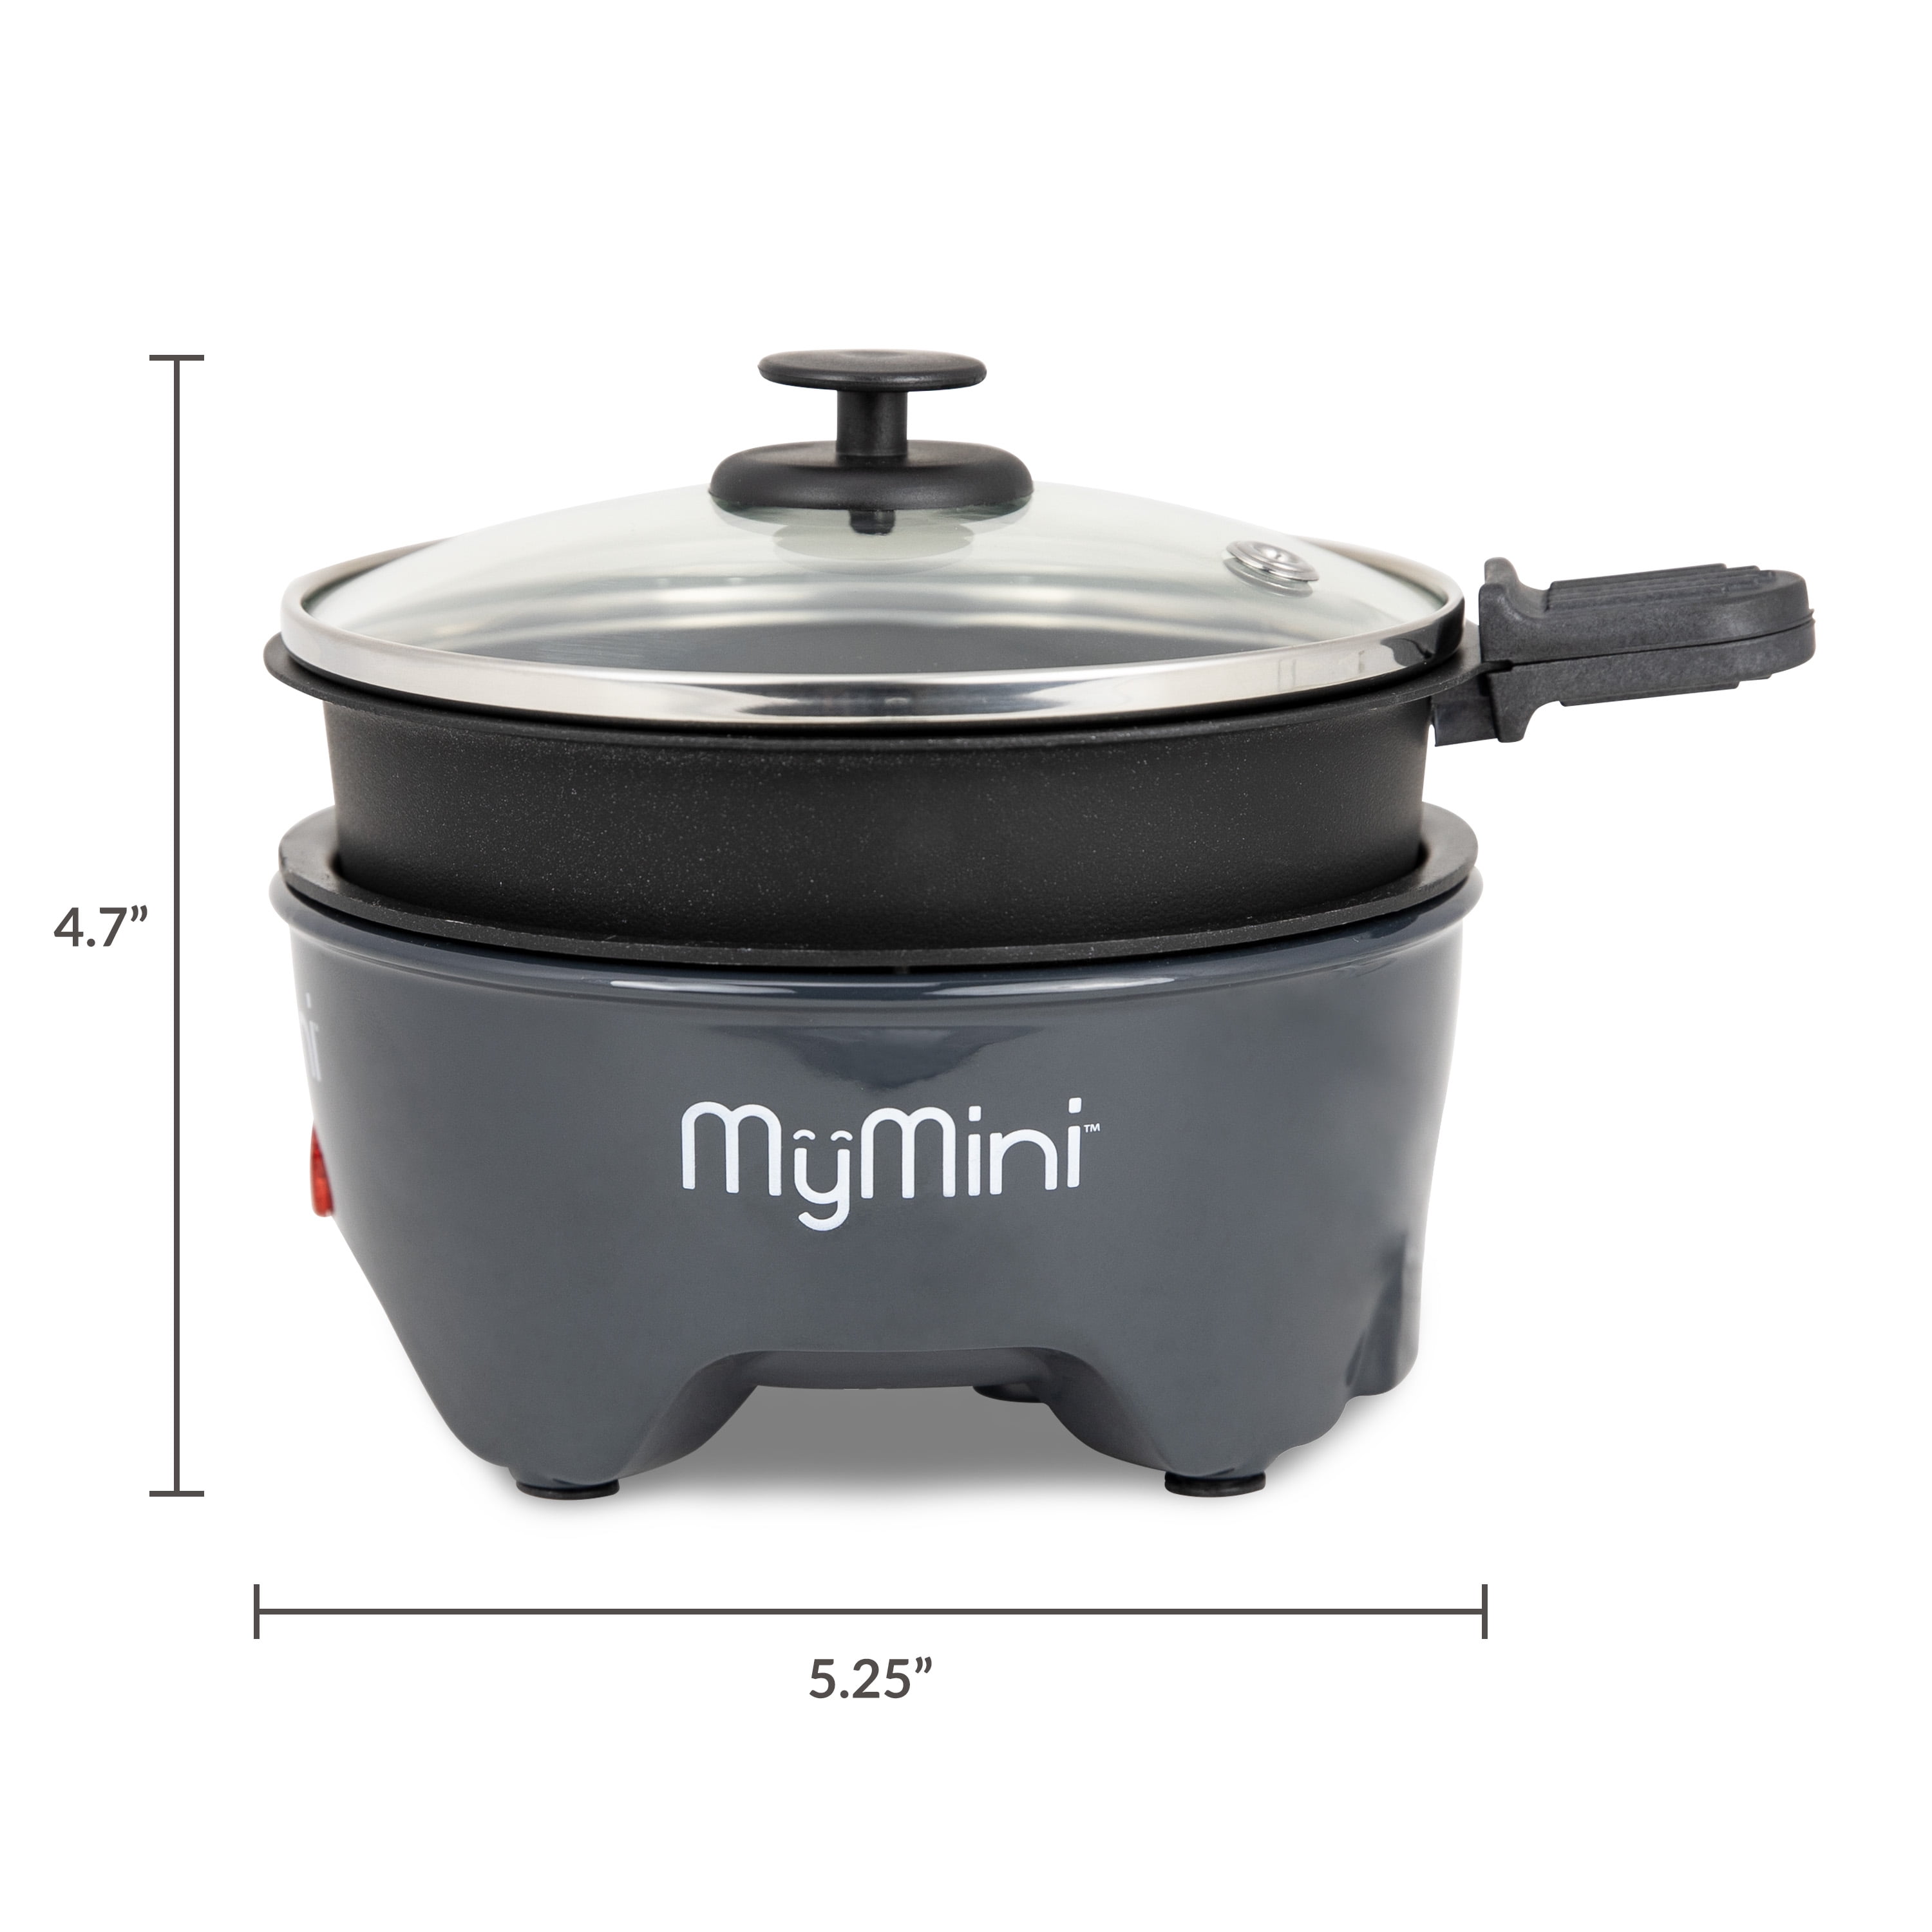 mymini skillet and noodle cooker make rice｜TikTok Search